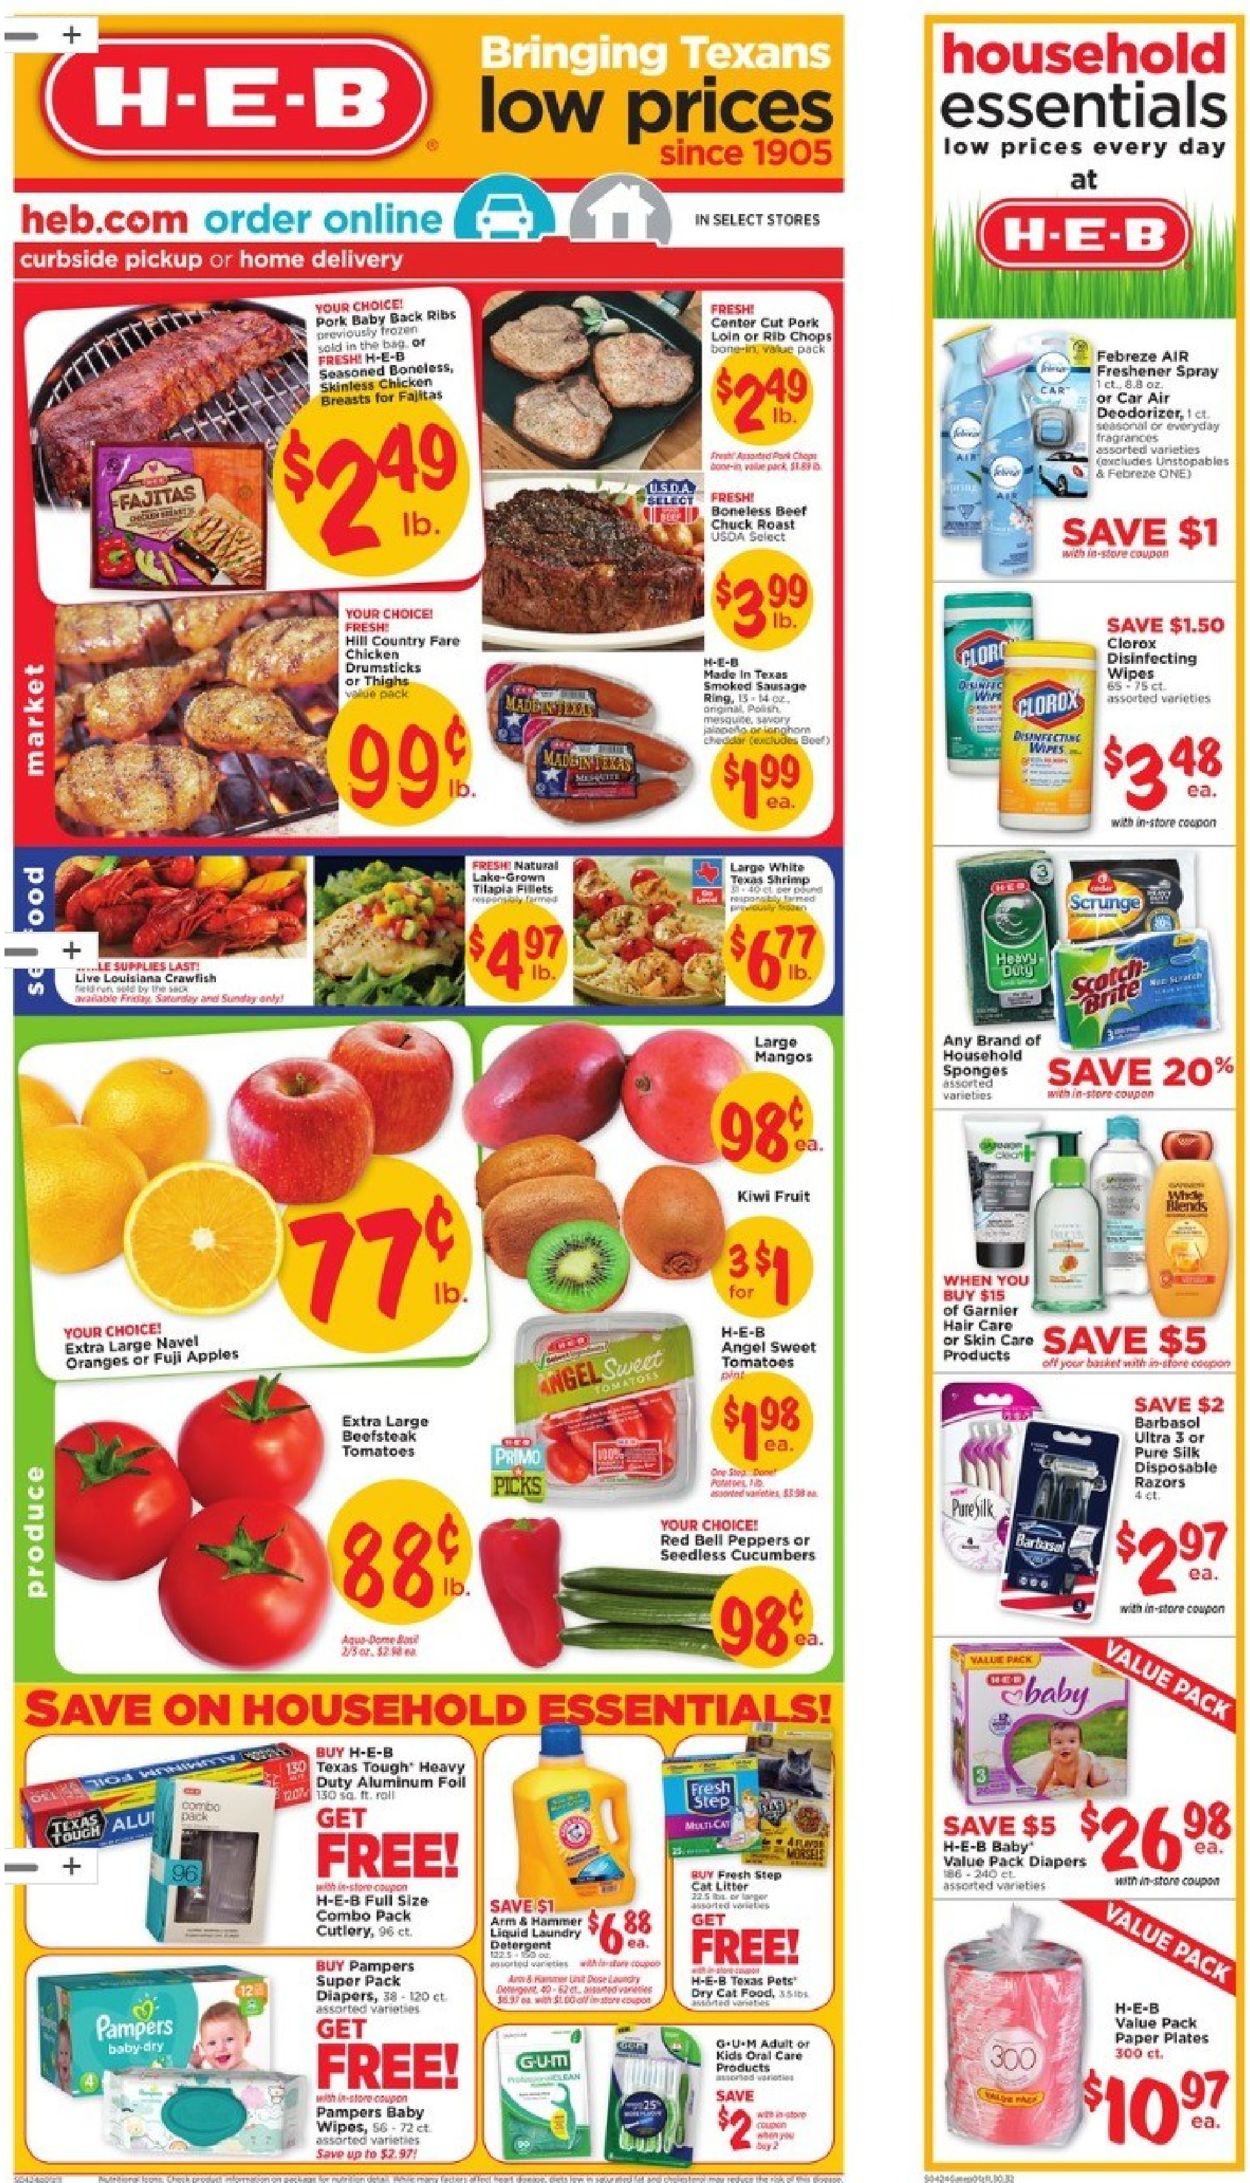 H-E-B Current weekly ad 04/24 - 04/30/2019 - frequent-ads.com